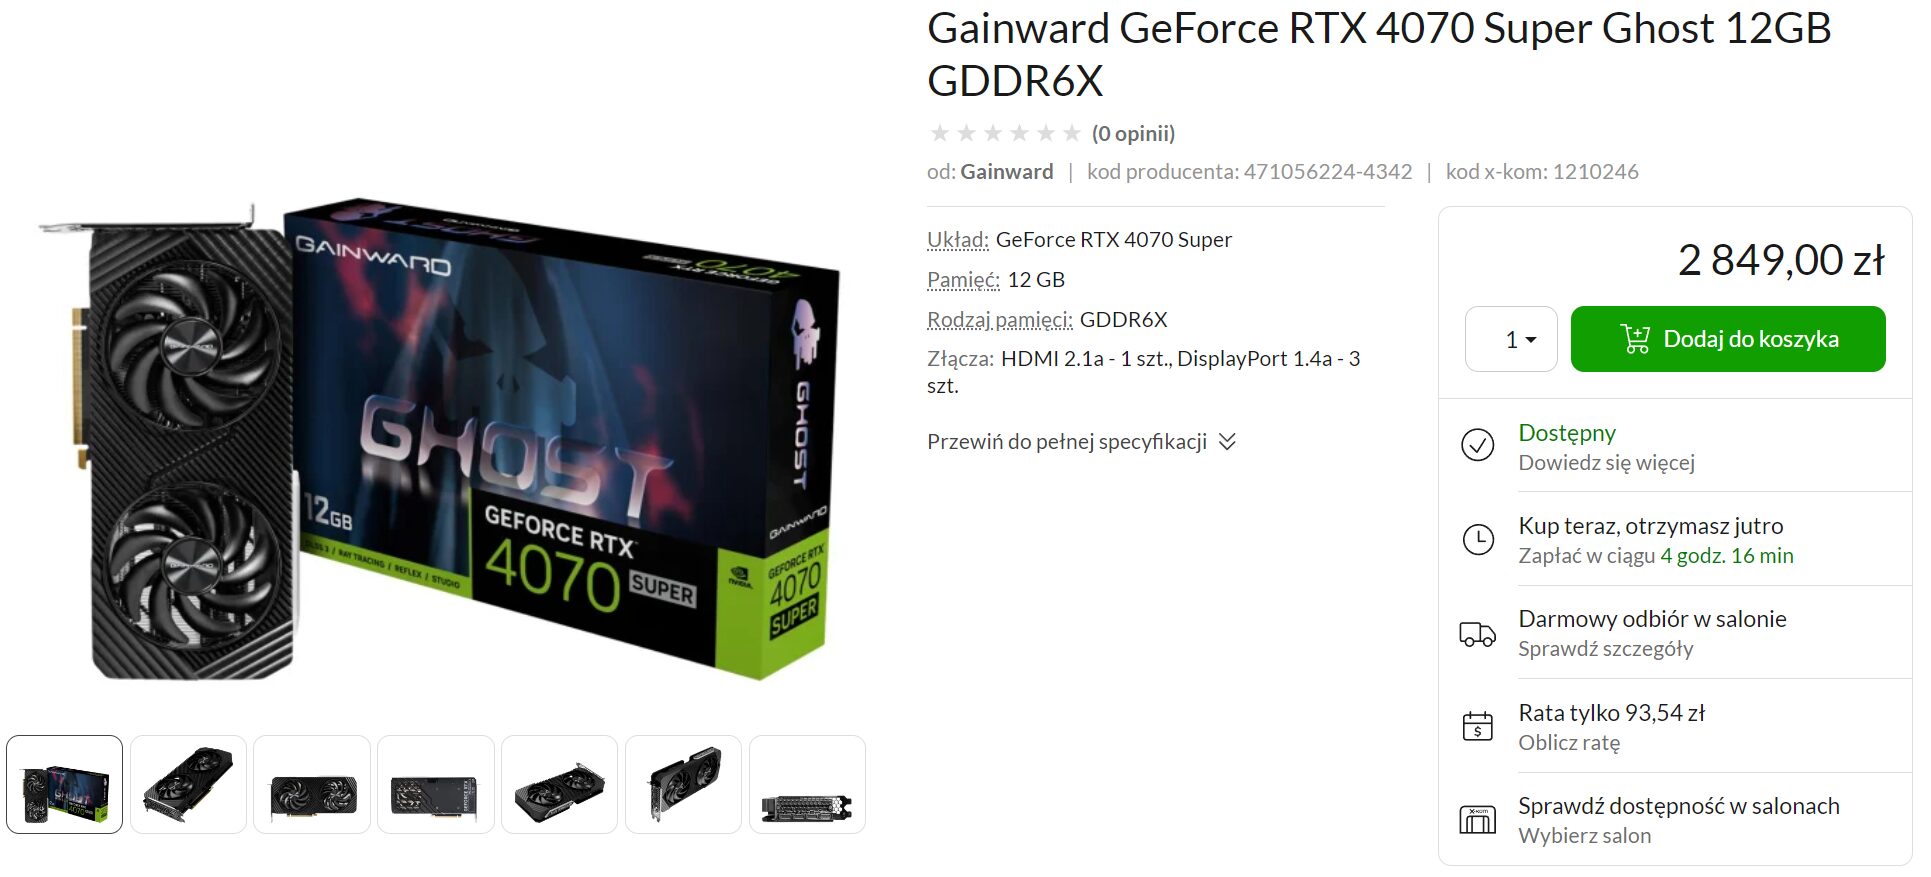 NVIDIA GeForce RTX 4070 SUPER already spotted below MSRP in Europe